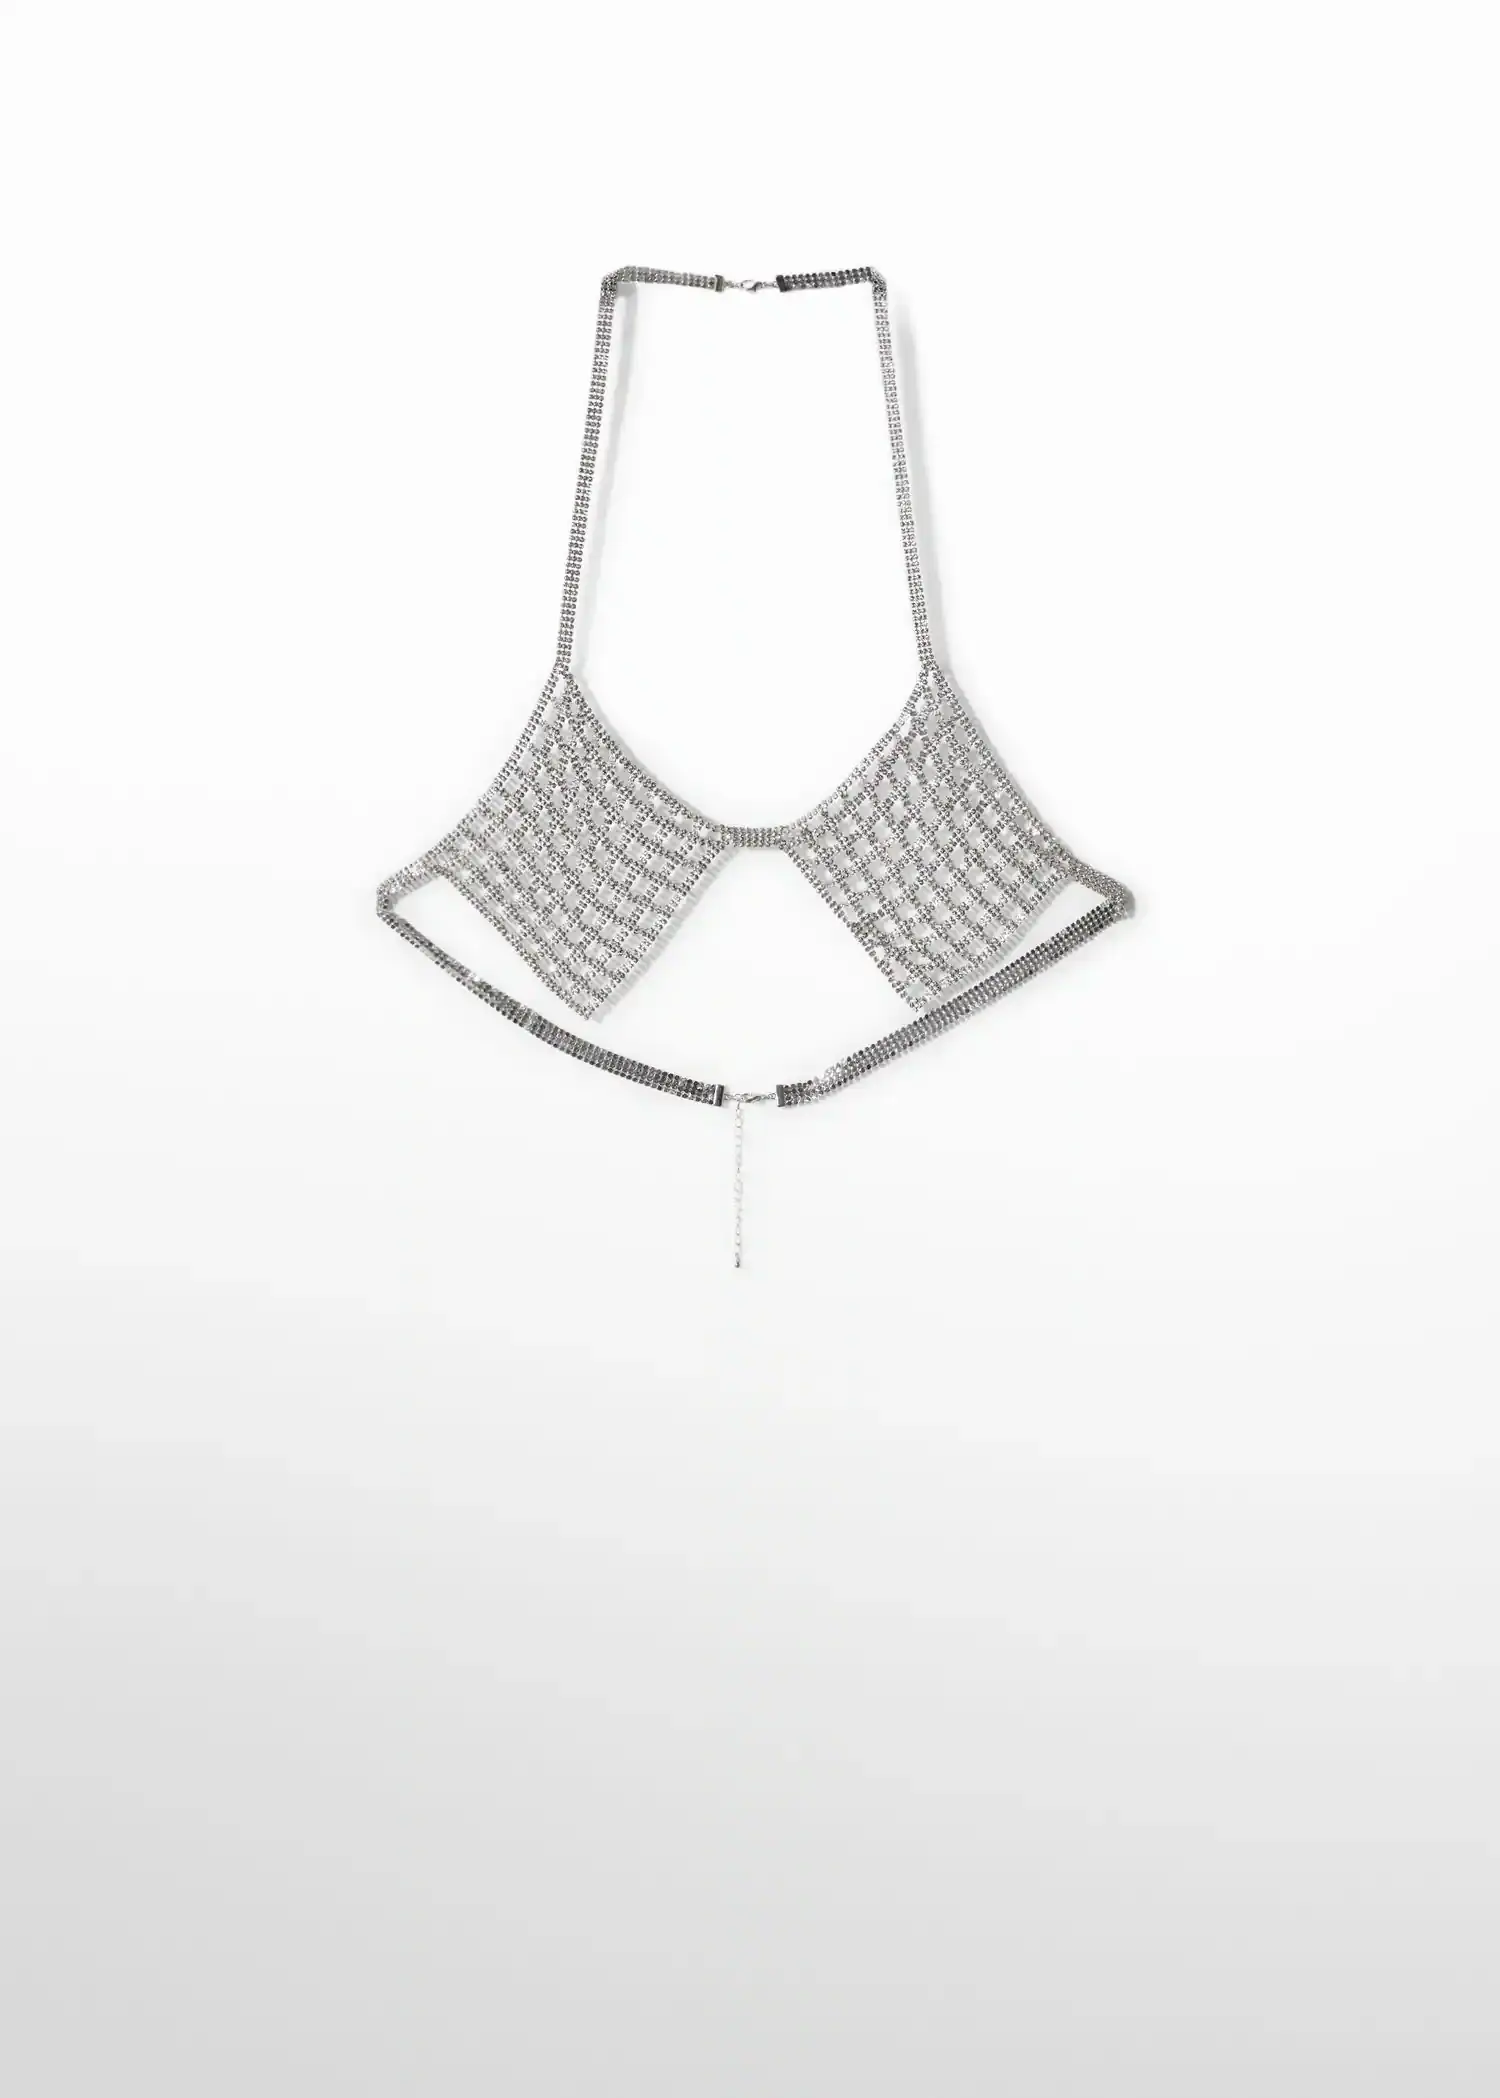 Mango Metallic mesh bra. a necklace that is made to look like a collar. 